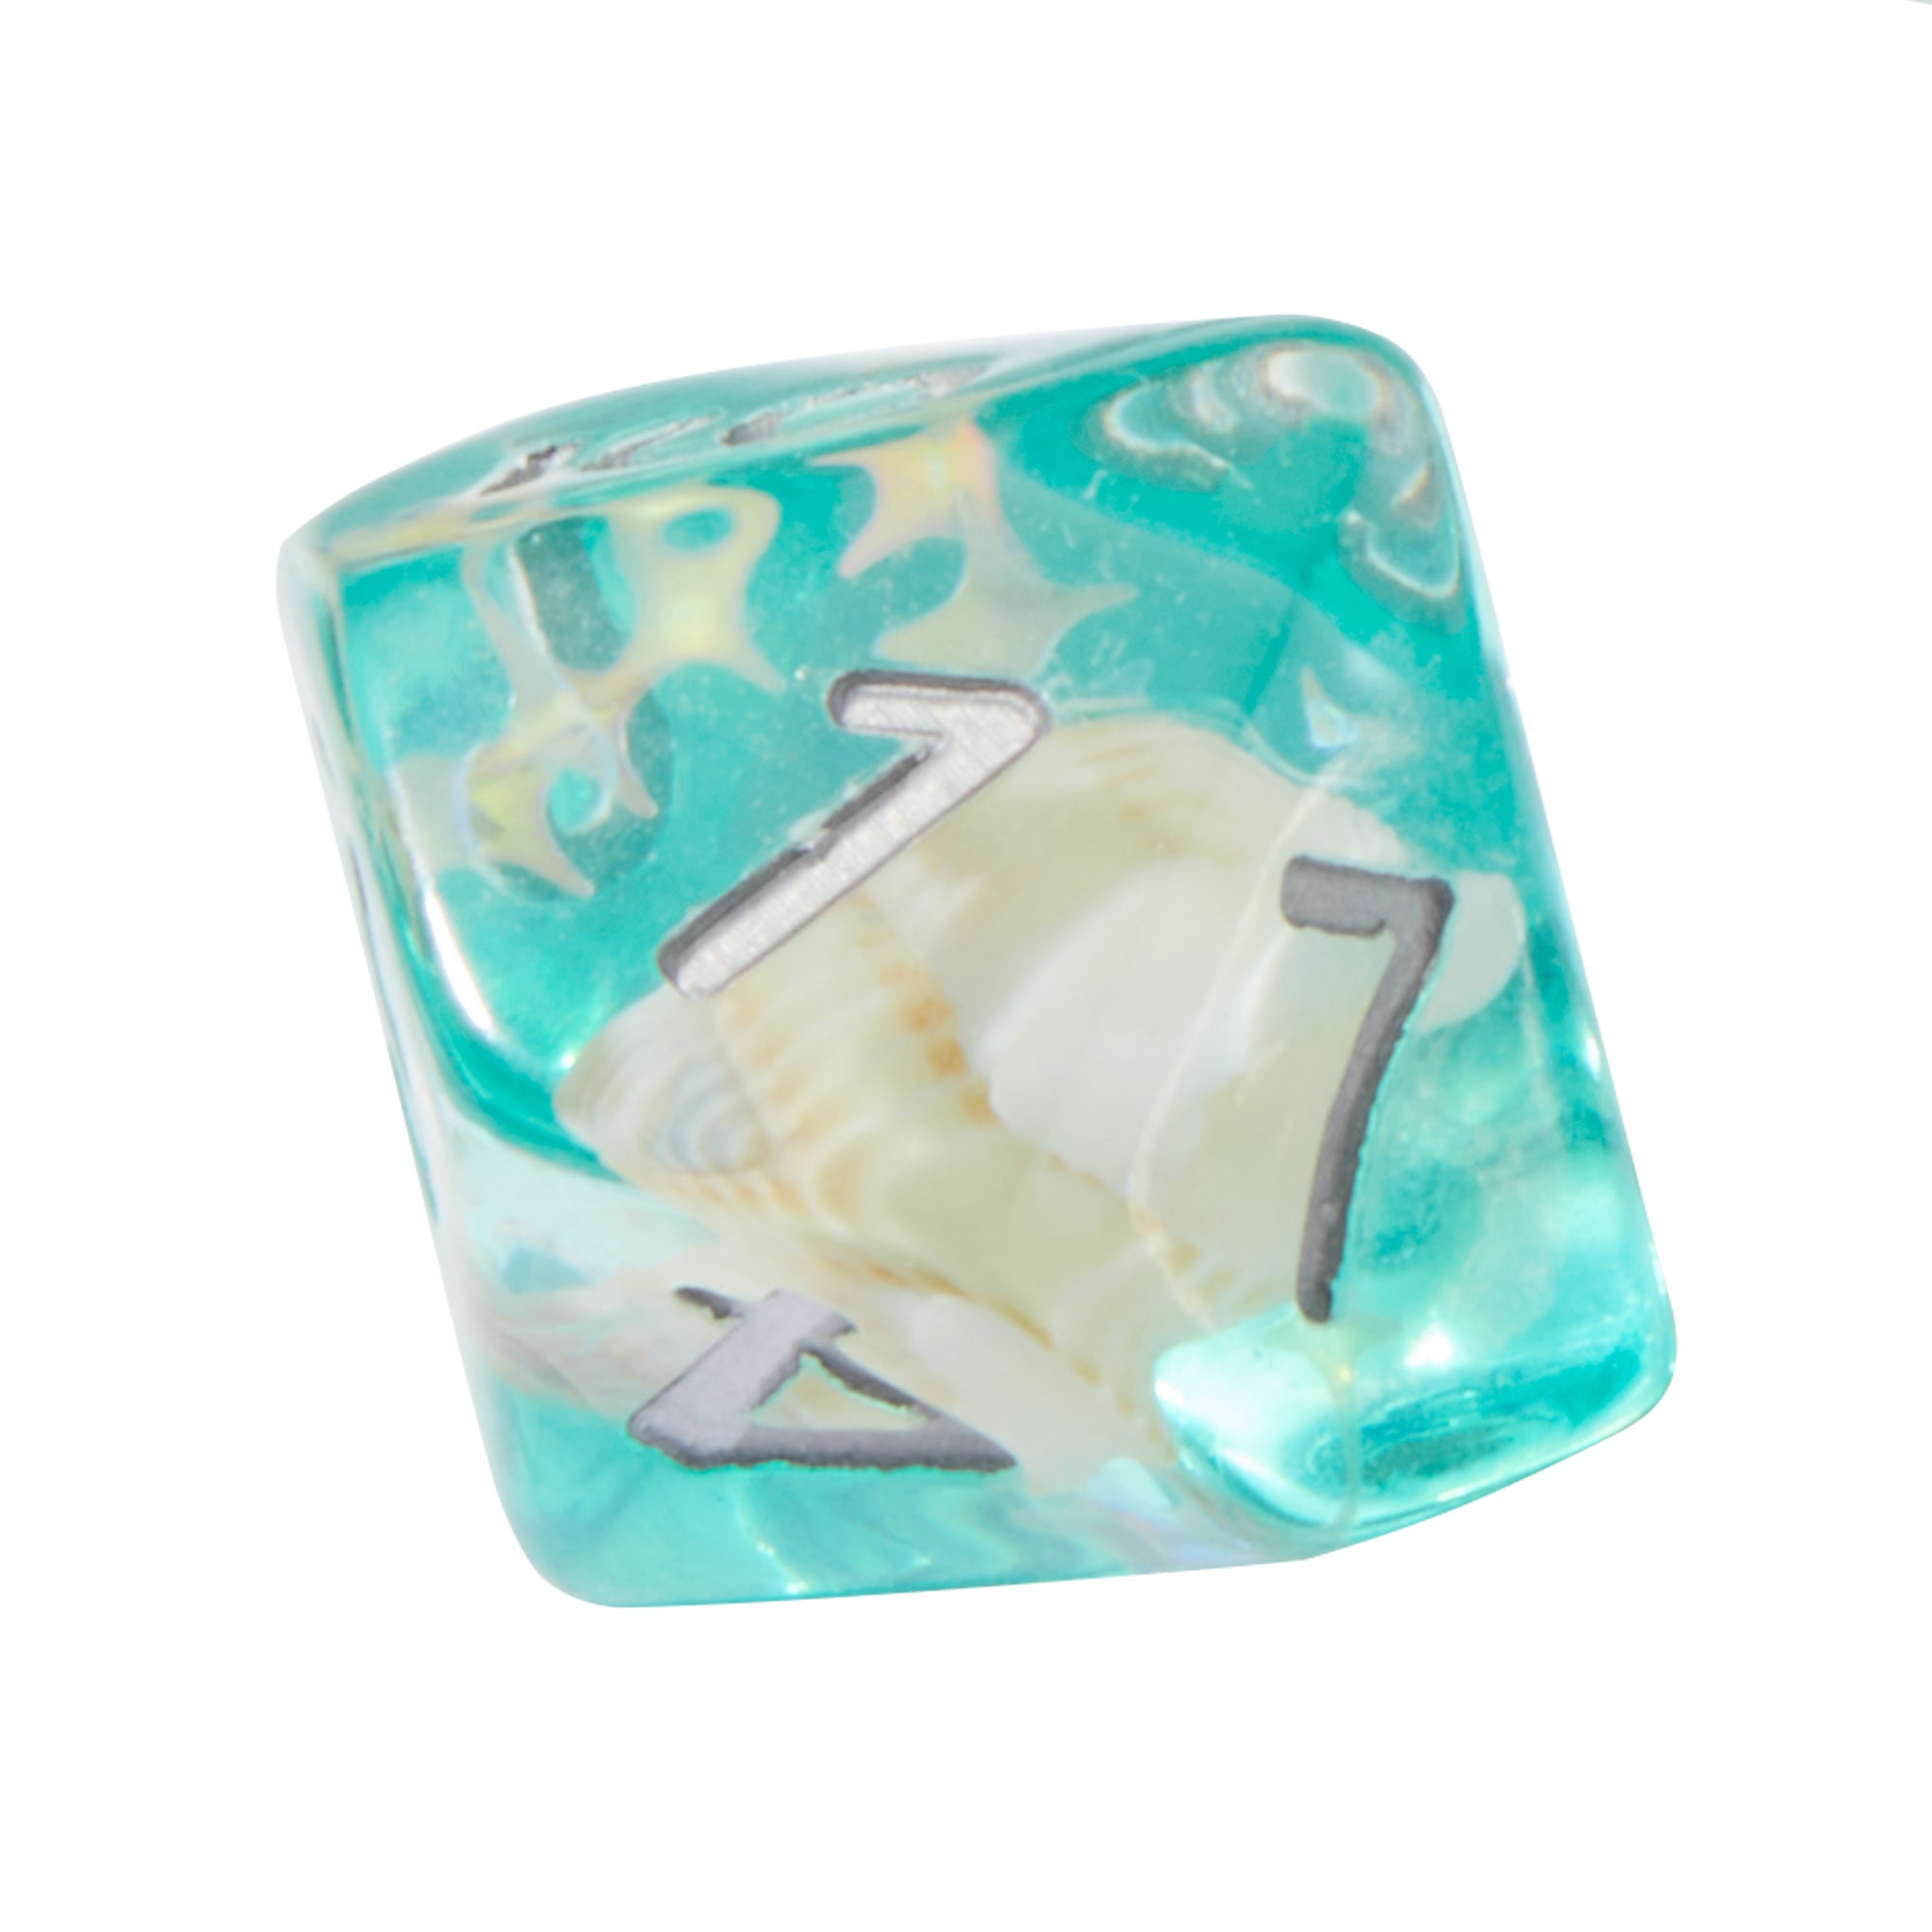 Teal Conch Shell Resin 7pc Dice Set | Rollacrit